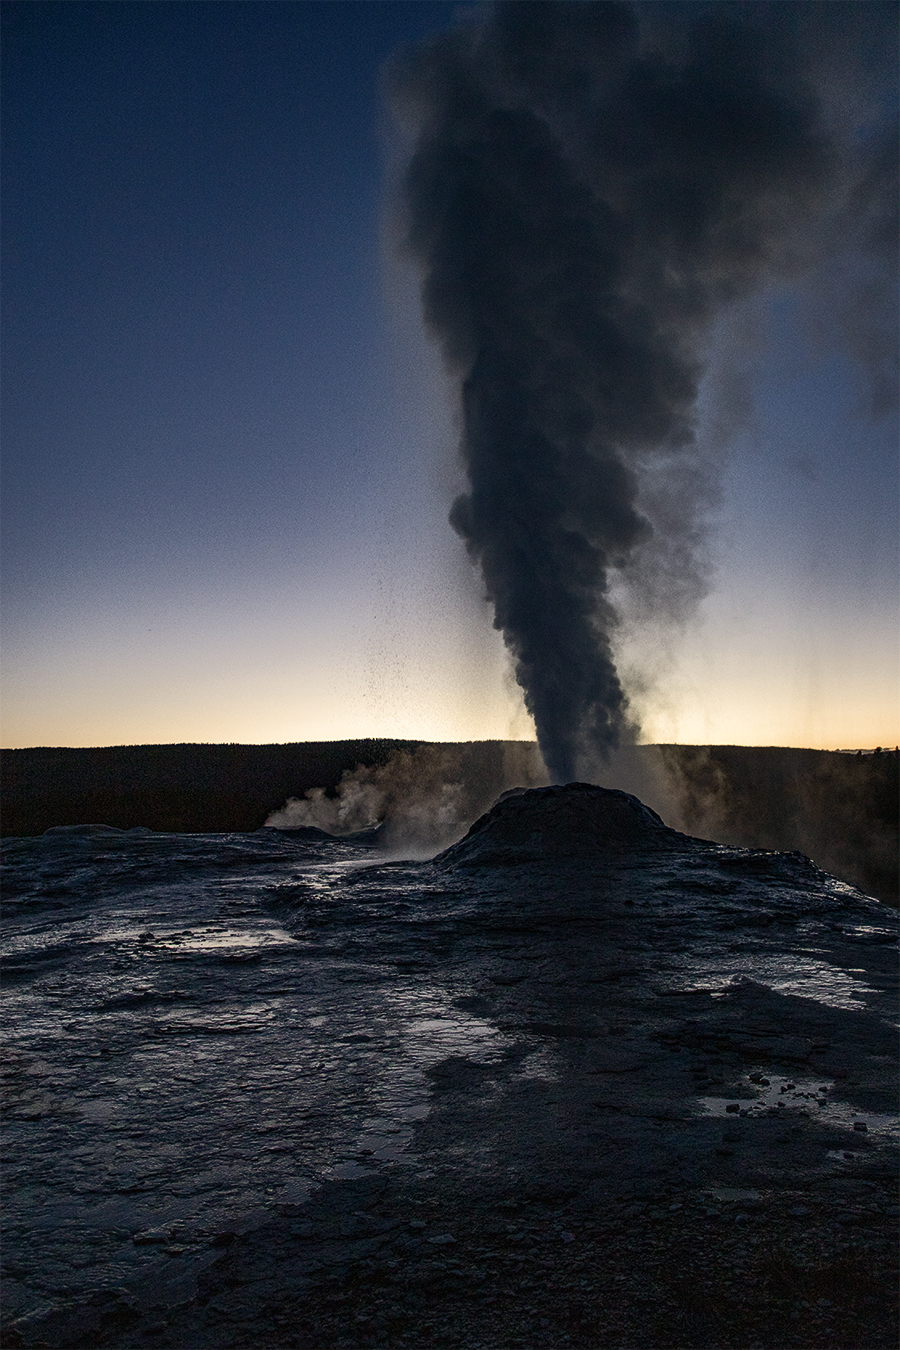 Late evening image of Lion Geyser